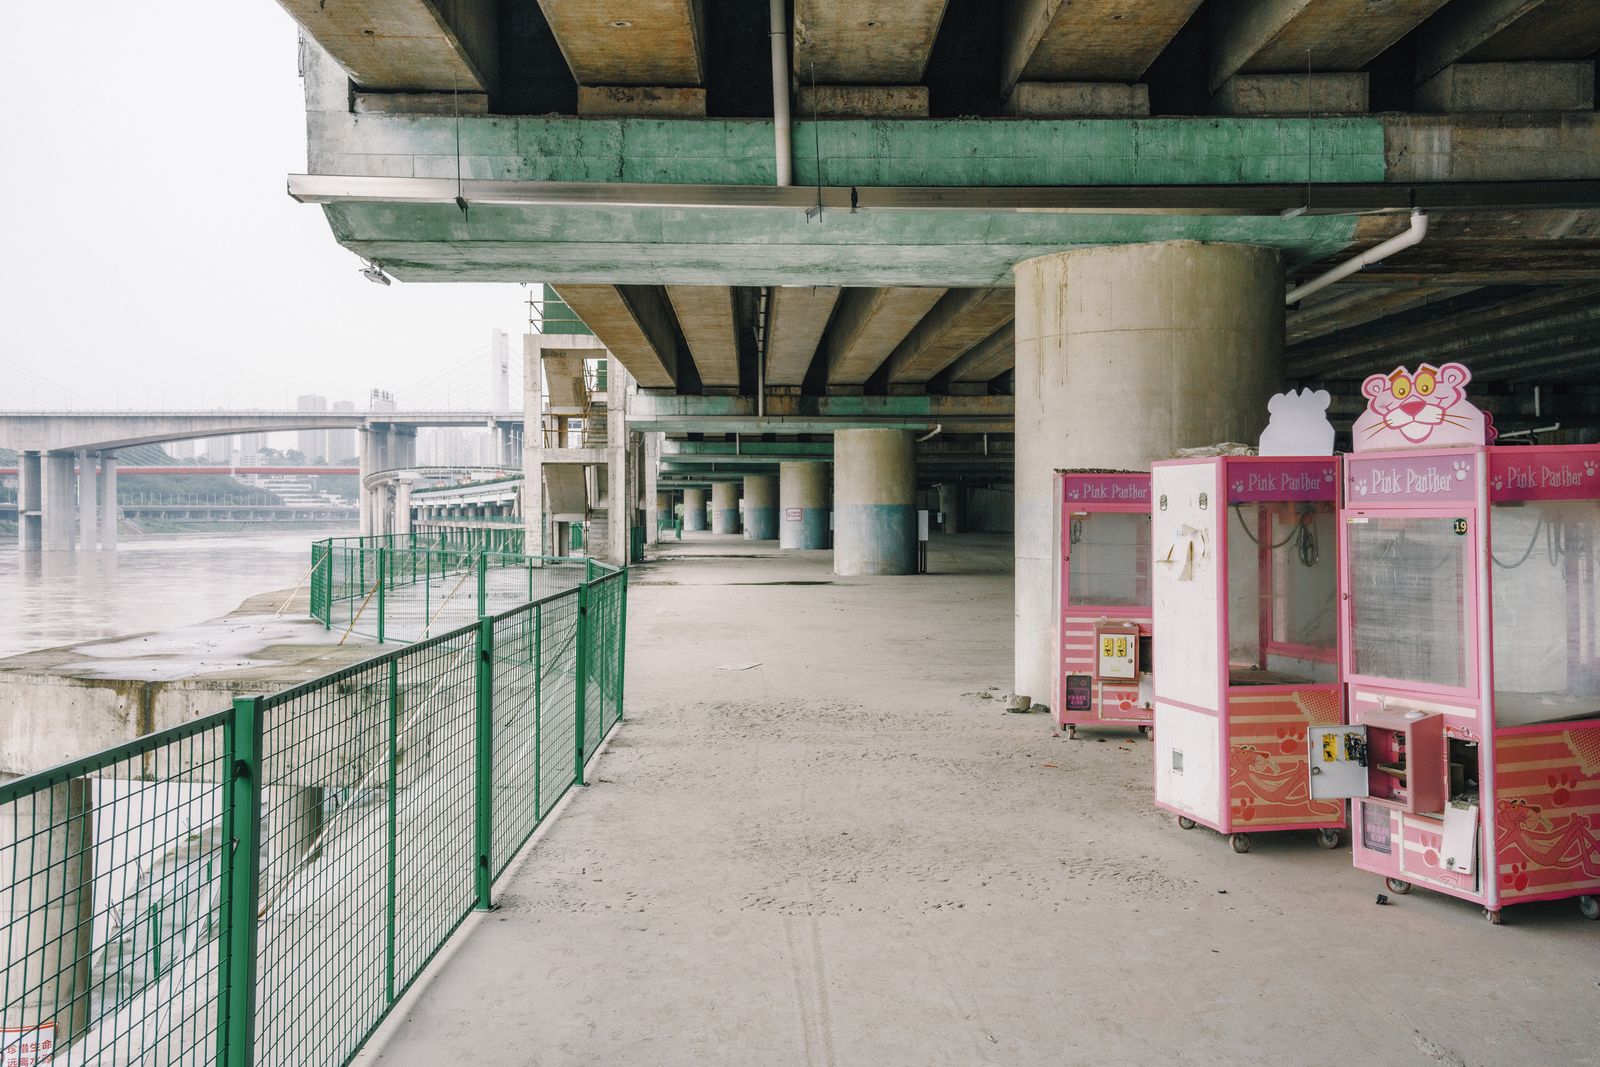 © Tianhu Yuan - Image from the Urban Arteries photography project